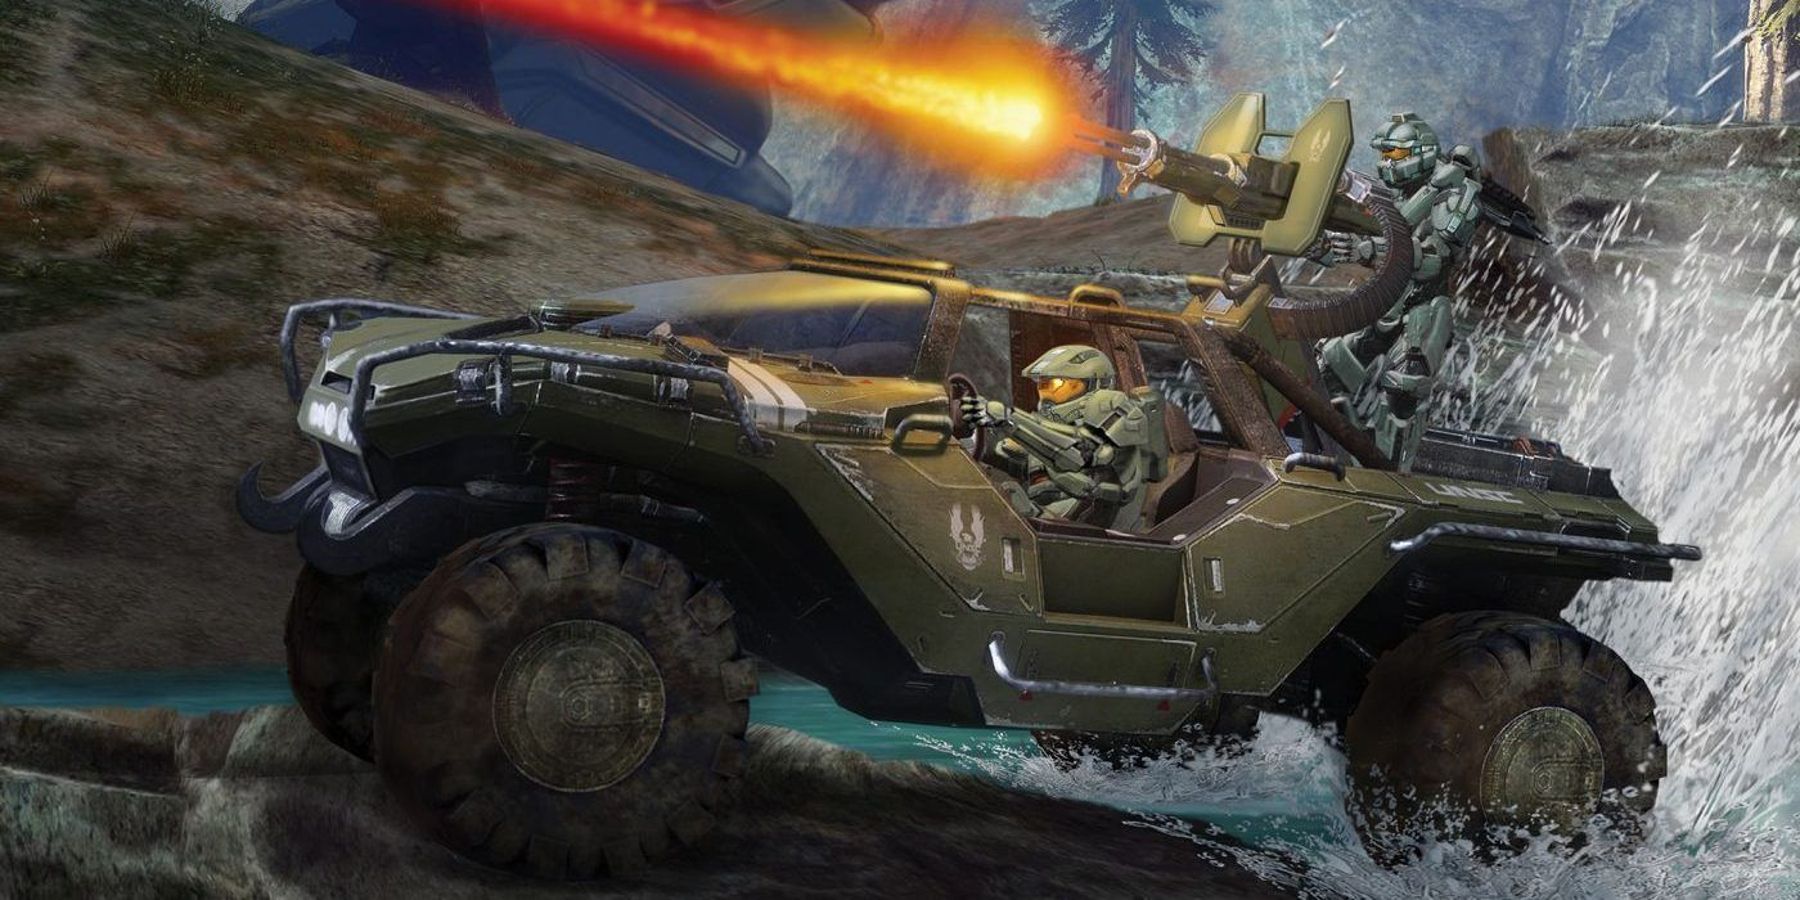 Screenshot of Spartans driving a a warthog in gameplay for Halo 3